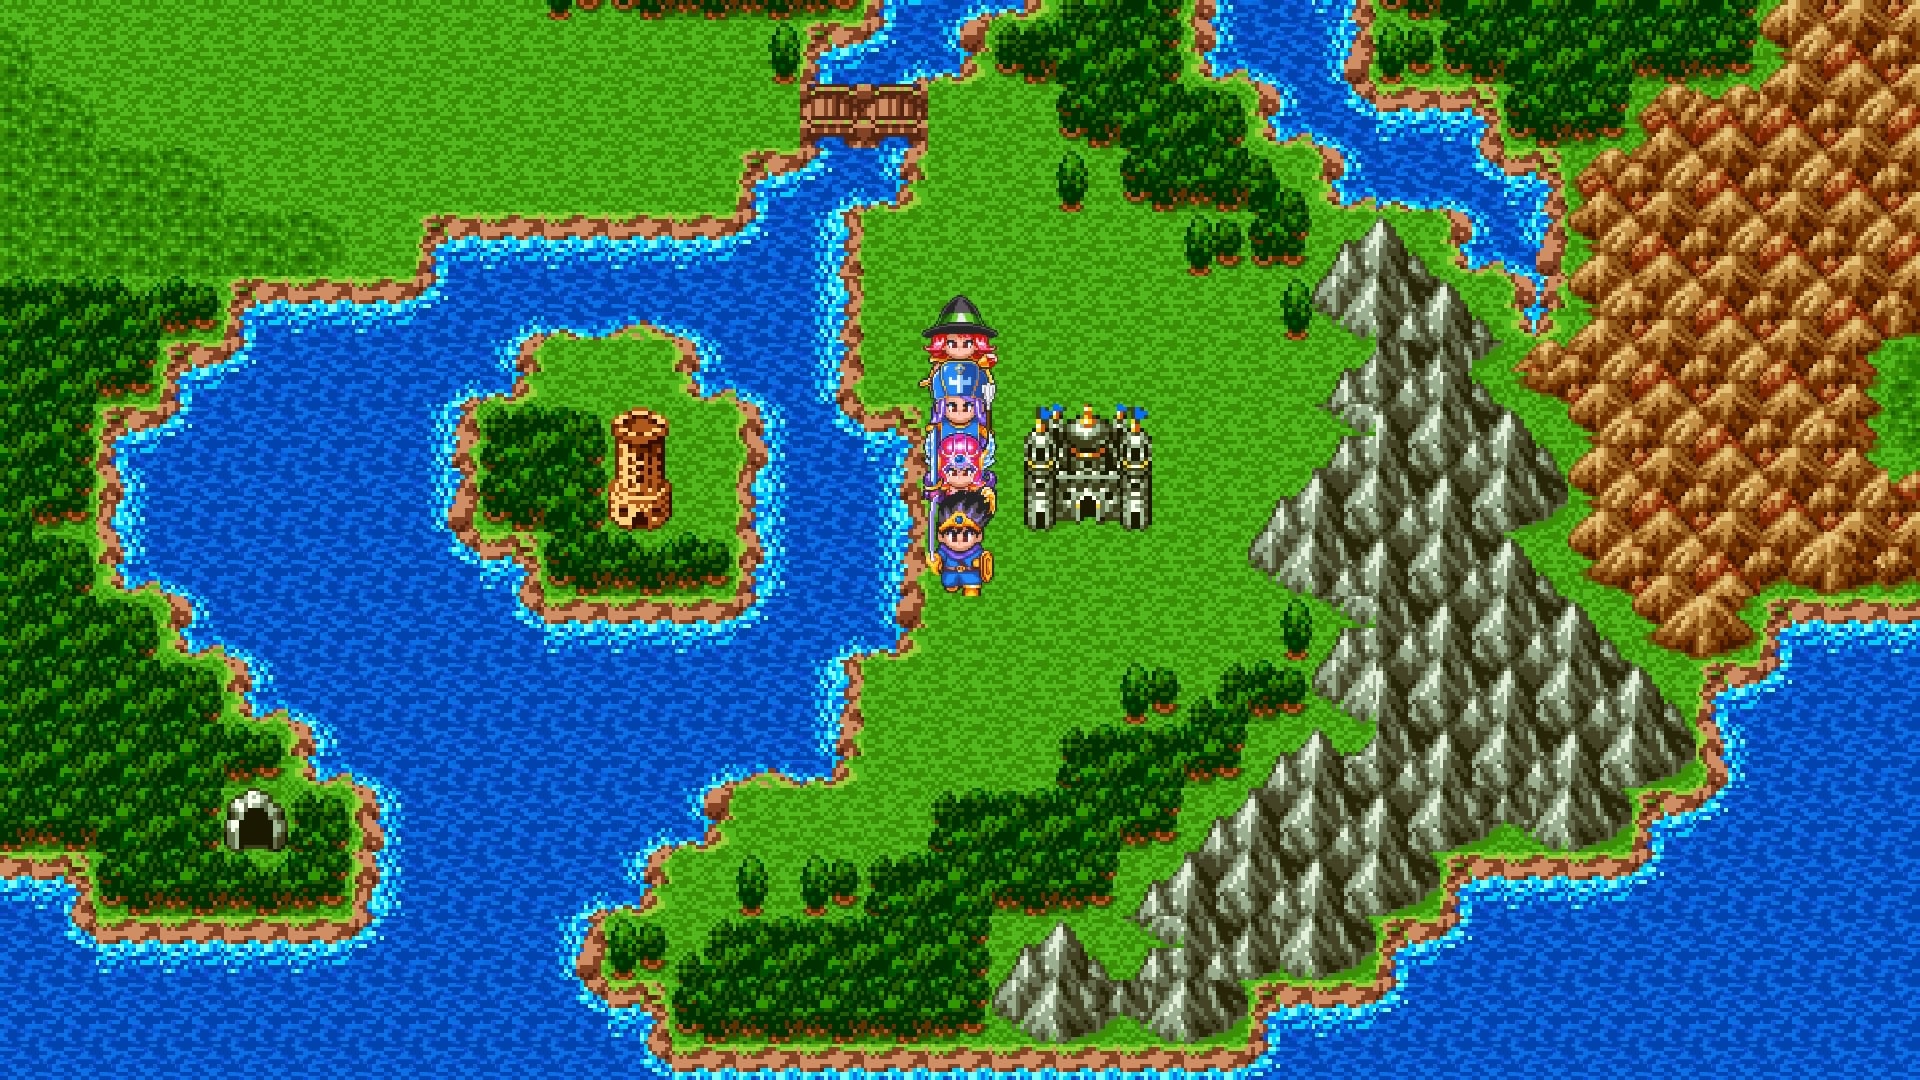 dragon-quest-iii-for-ps4-and-3ds-release-date-and-screenshots-rice